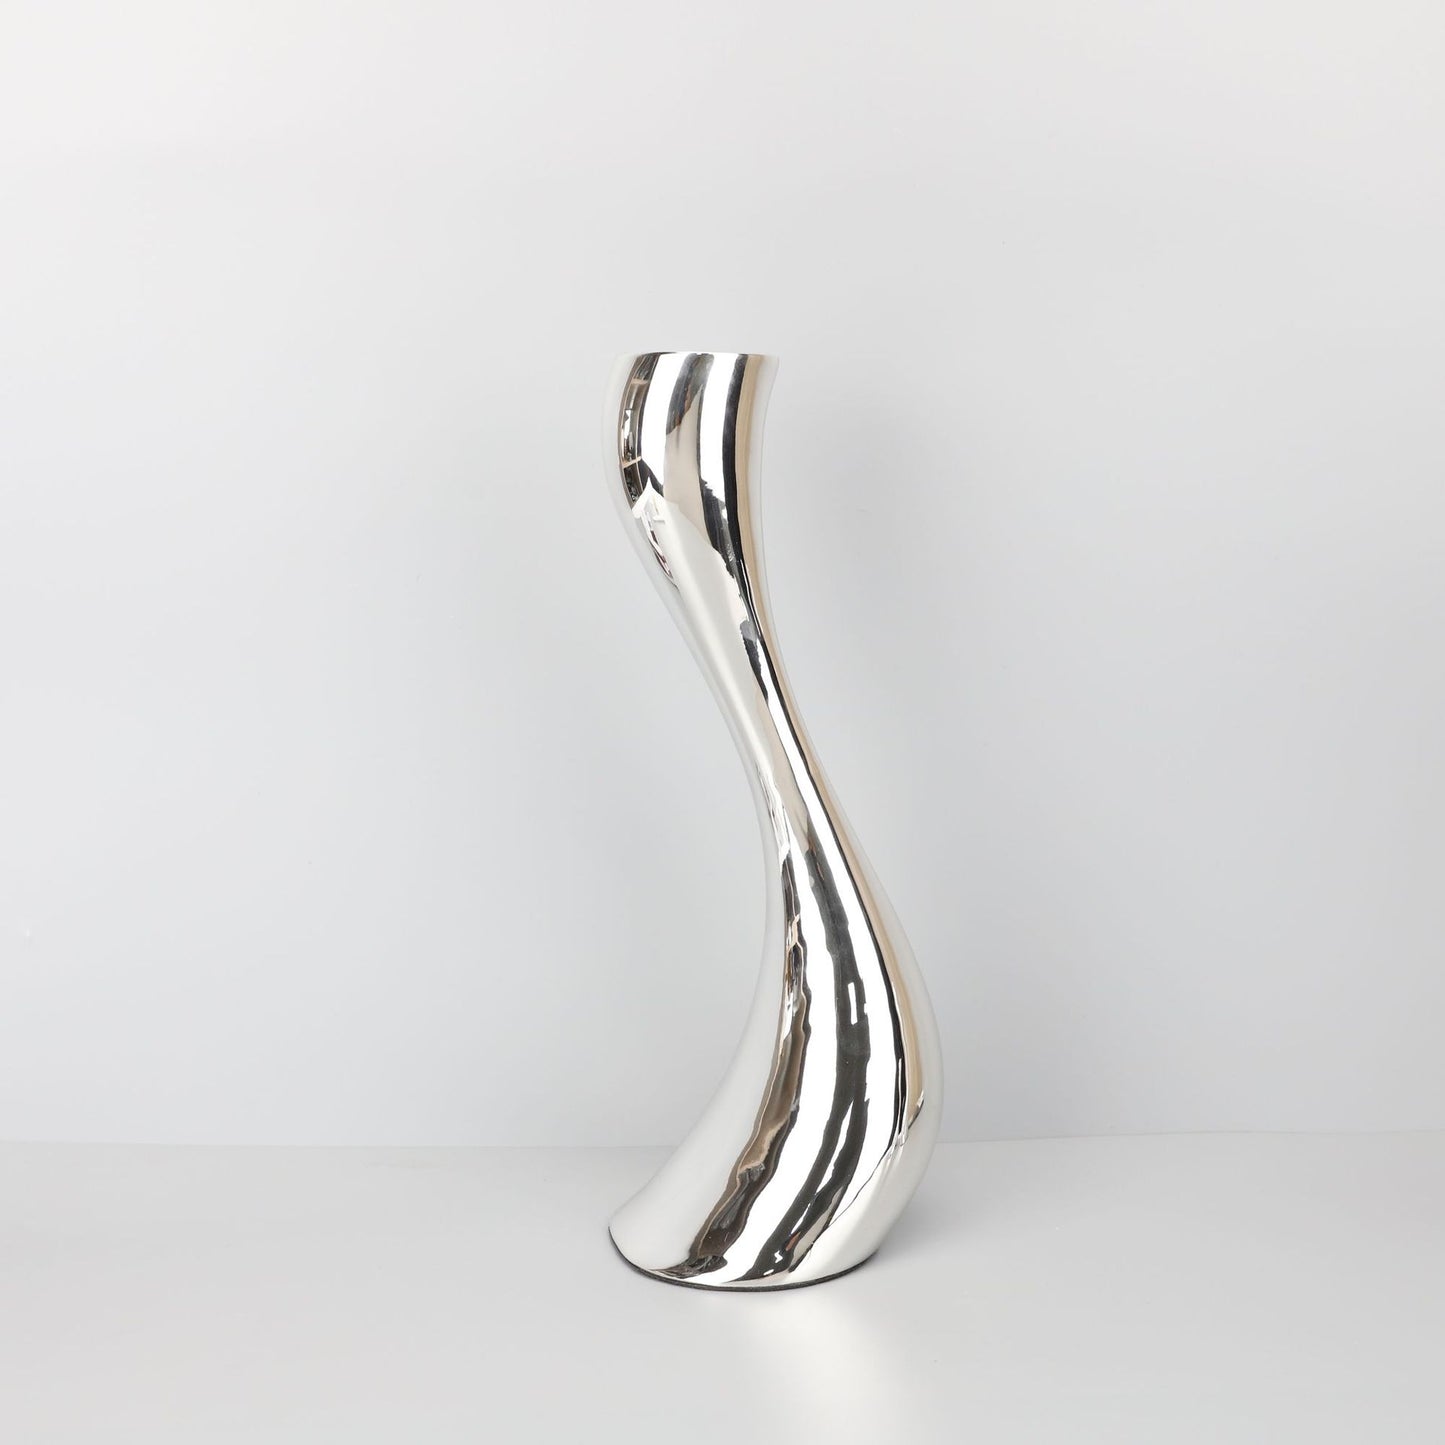 S-Shaped Resin Candle Holders: Modern Silver Decor for Hotels, Homes, and Living Rooms (Large: 5.5x5.1x15 inches, Medium: 3.1x3.7x9.4 inches, Small: 2.6x3.1x7.9 inches)，Set of 3